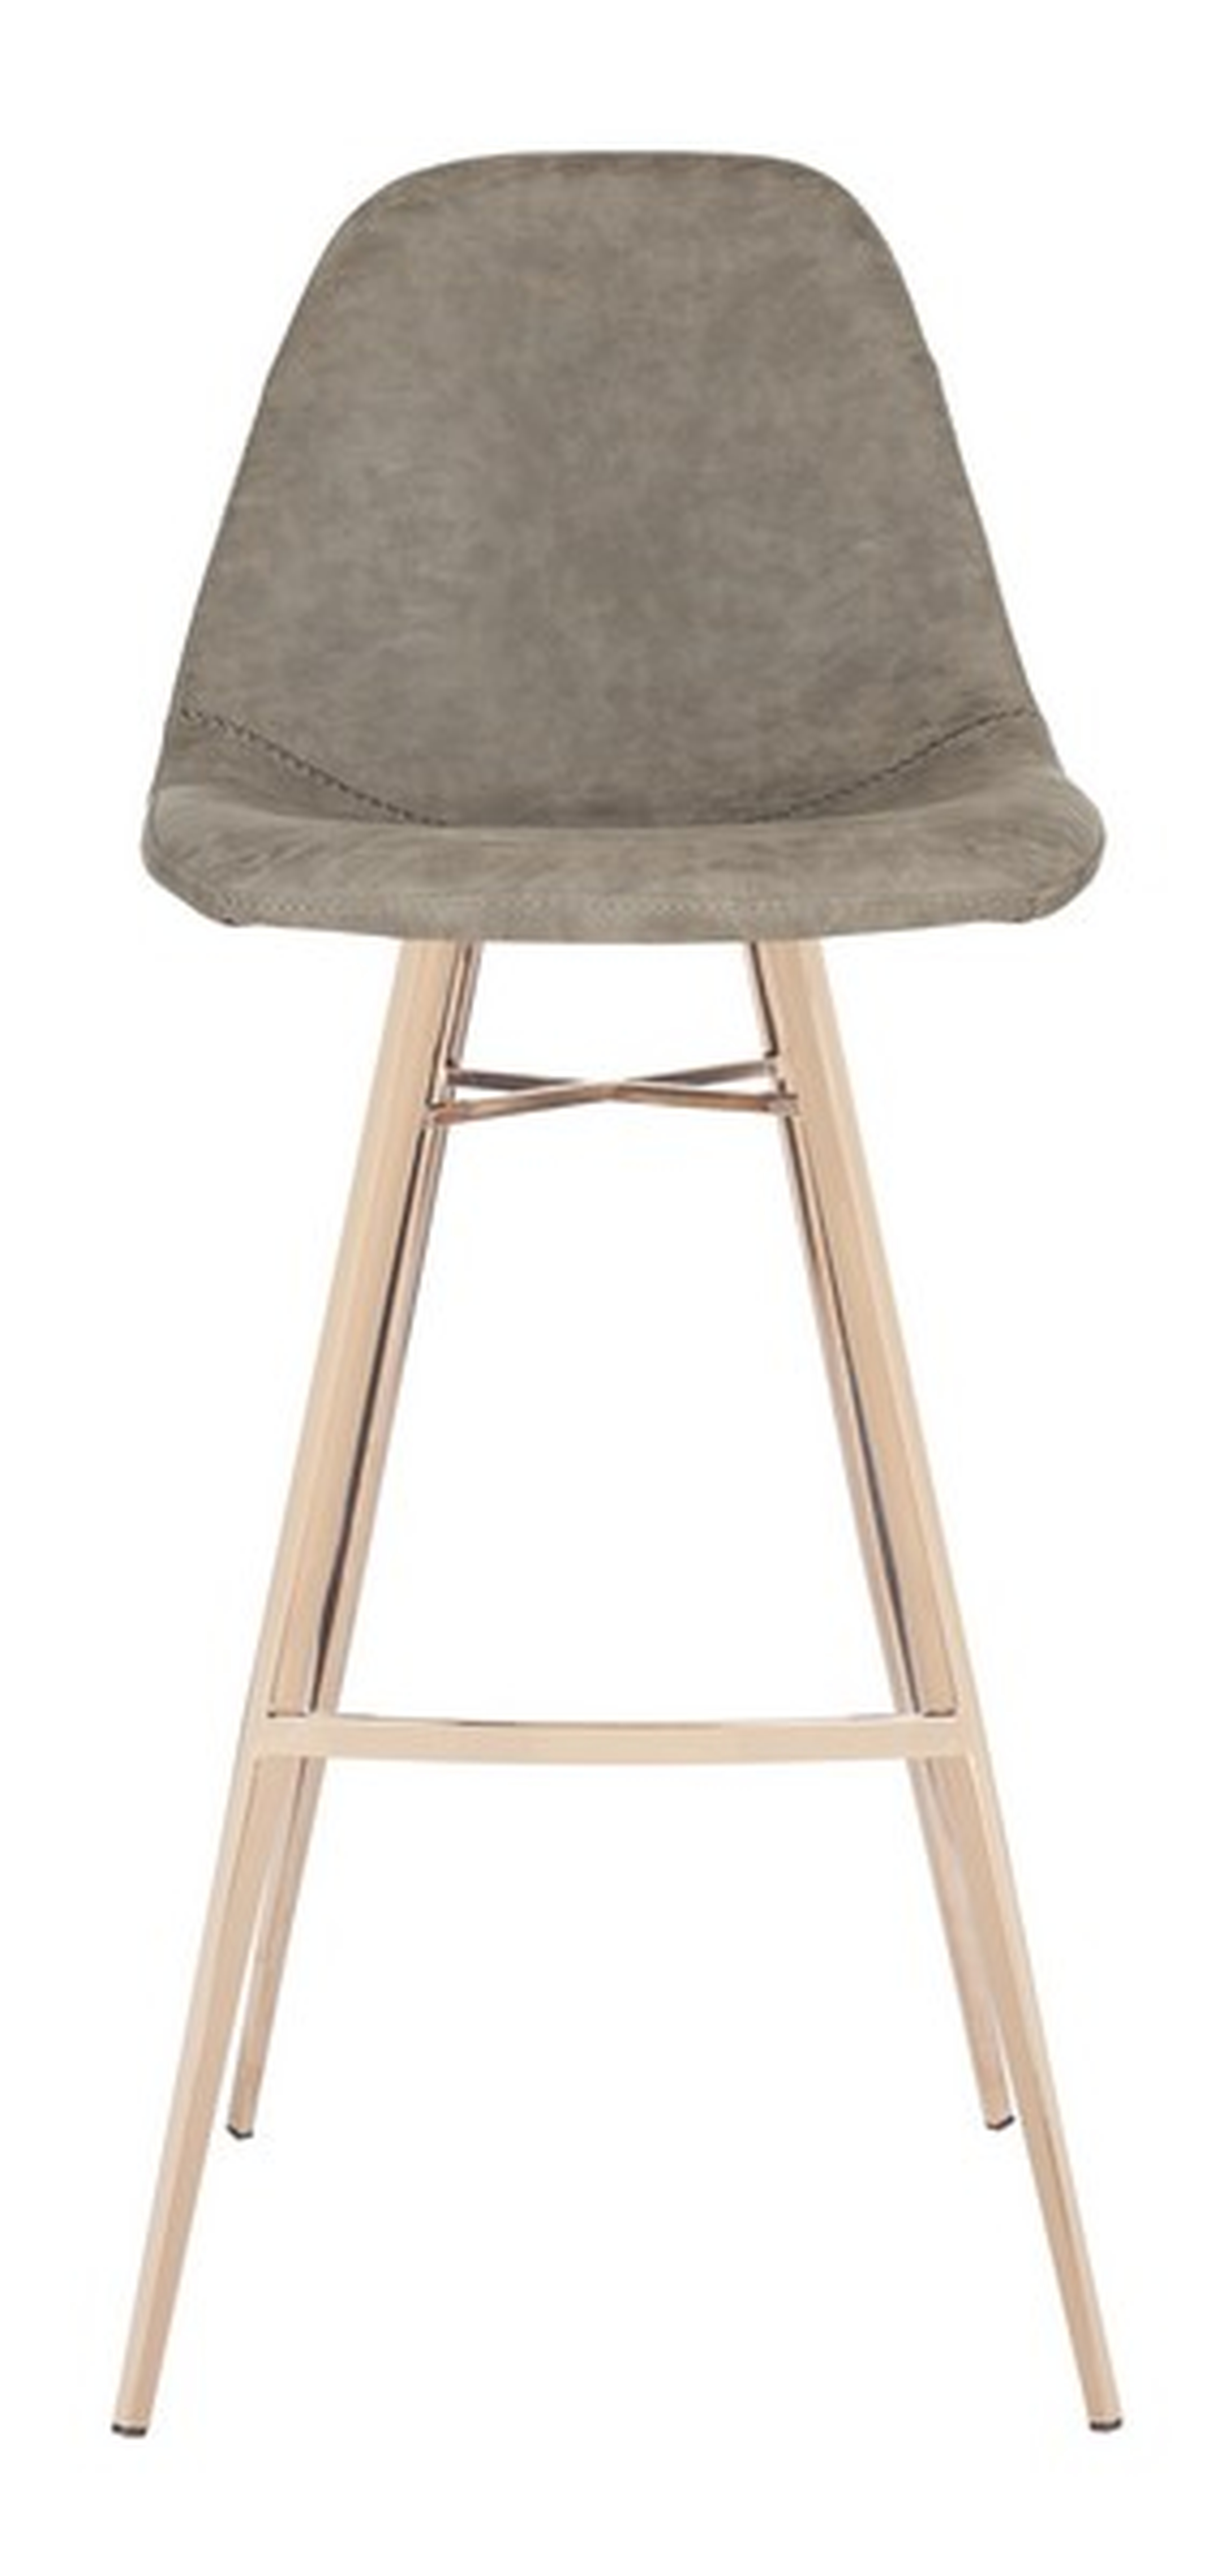 Mathison Bar Stool - Taupe/Copper - Arlo Home - Arlo Home